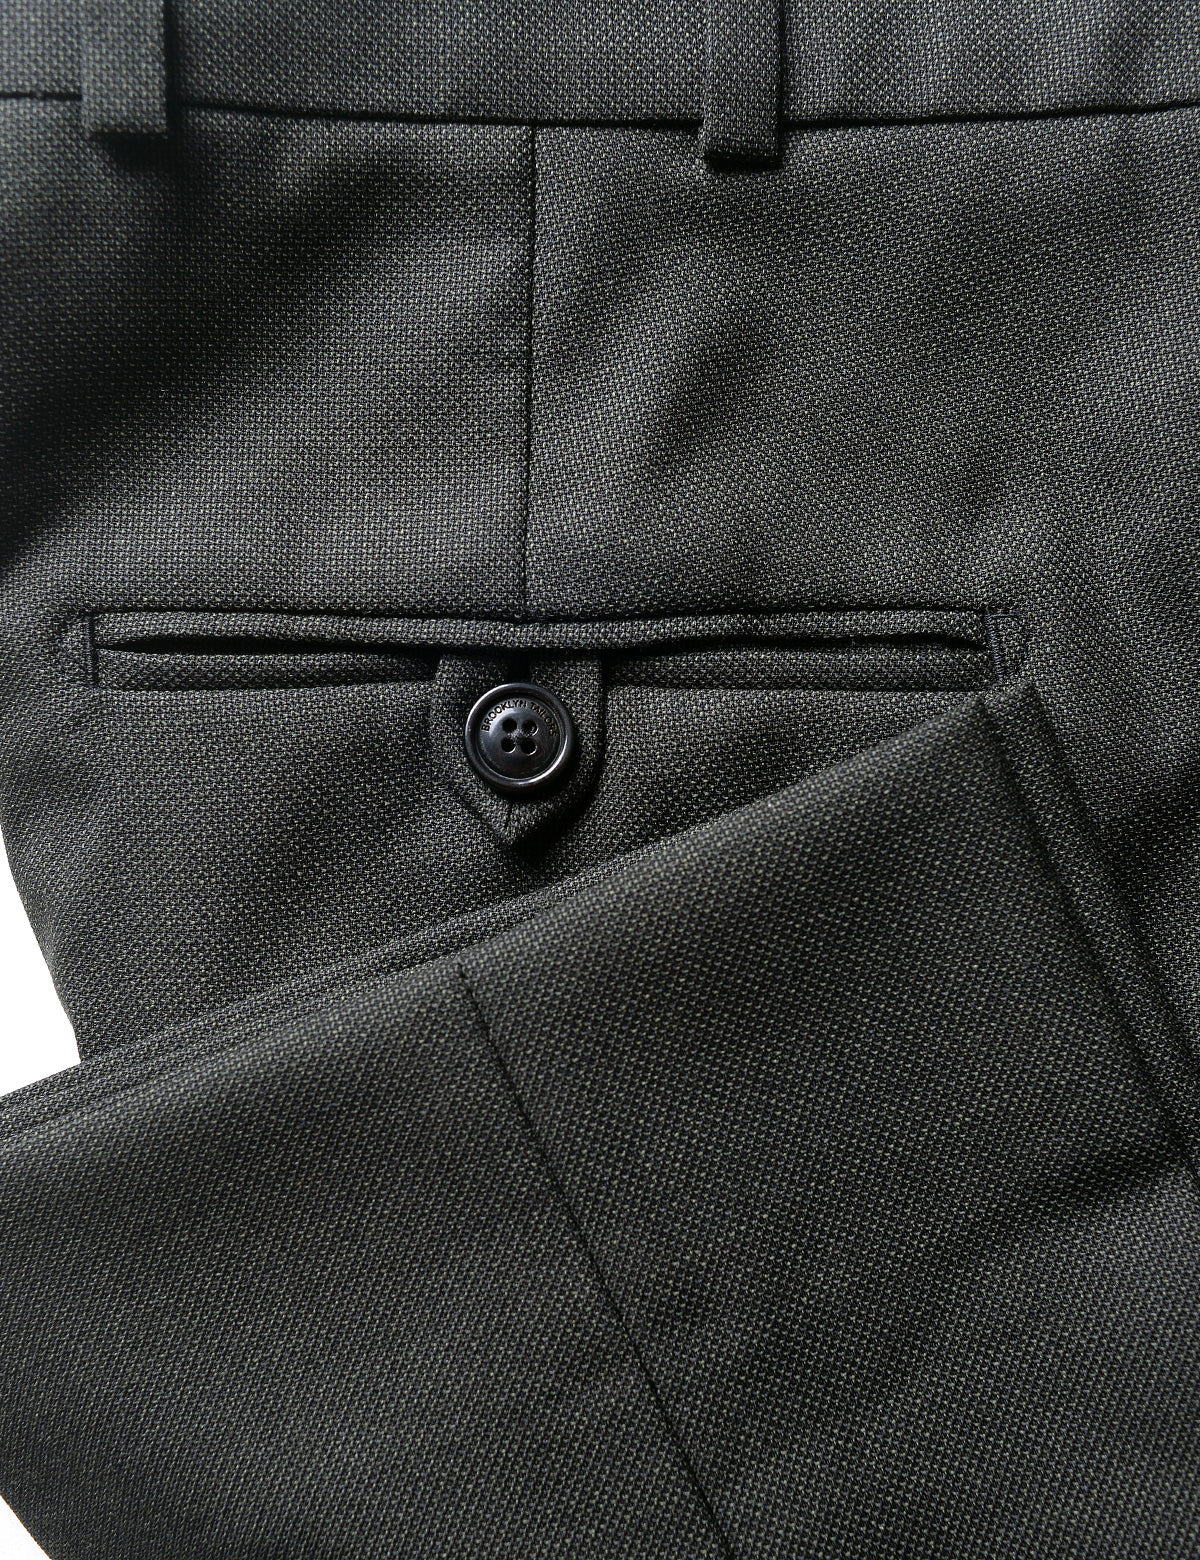 Detail shot of BKT50 Tailored Trousers in Textured Wool - Wrought Iron showing back pocket, hem, and fabric texture